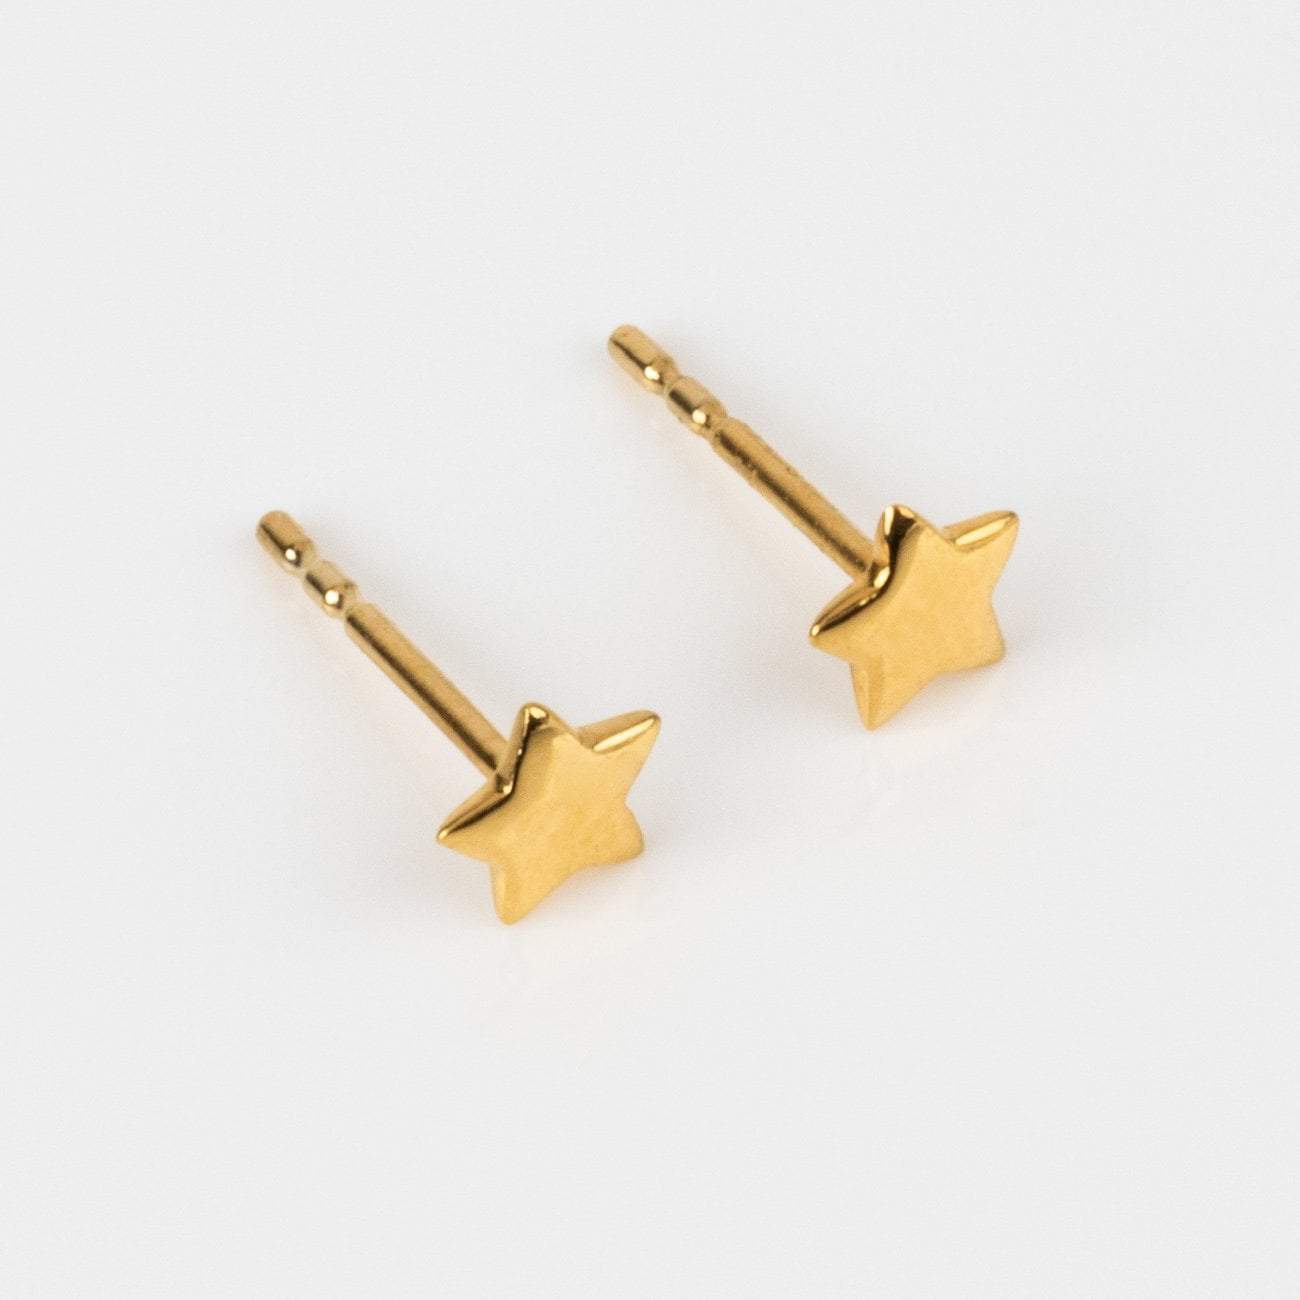 Solid Yellow Gold Star Stud Earring Fine Jewelry Family Gold